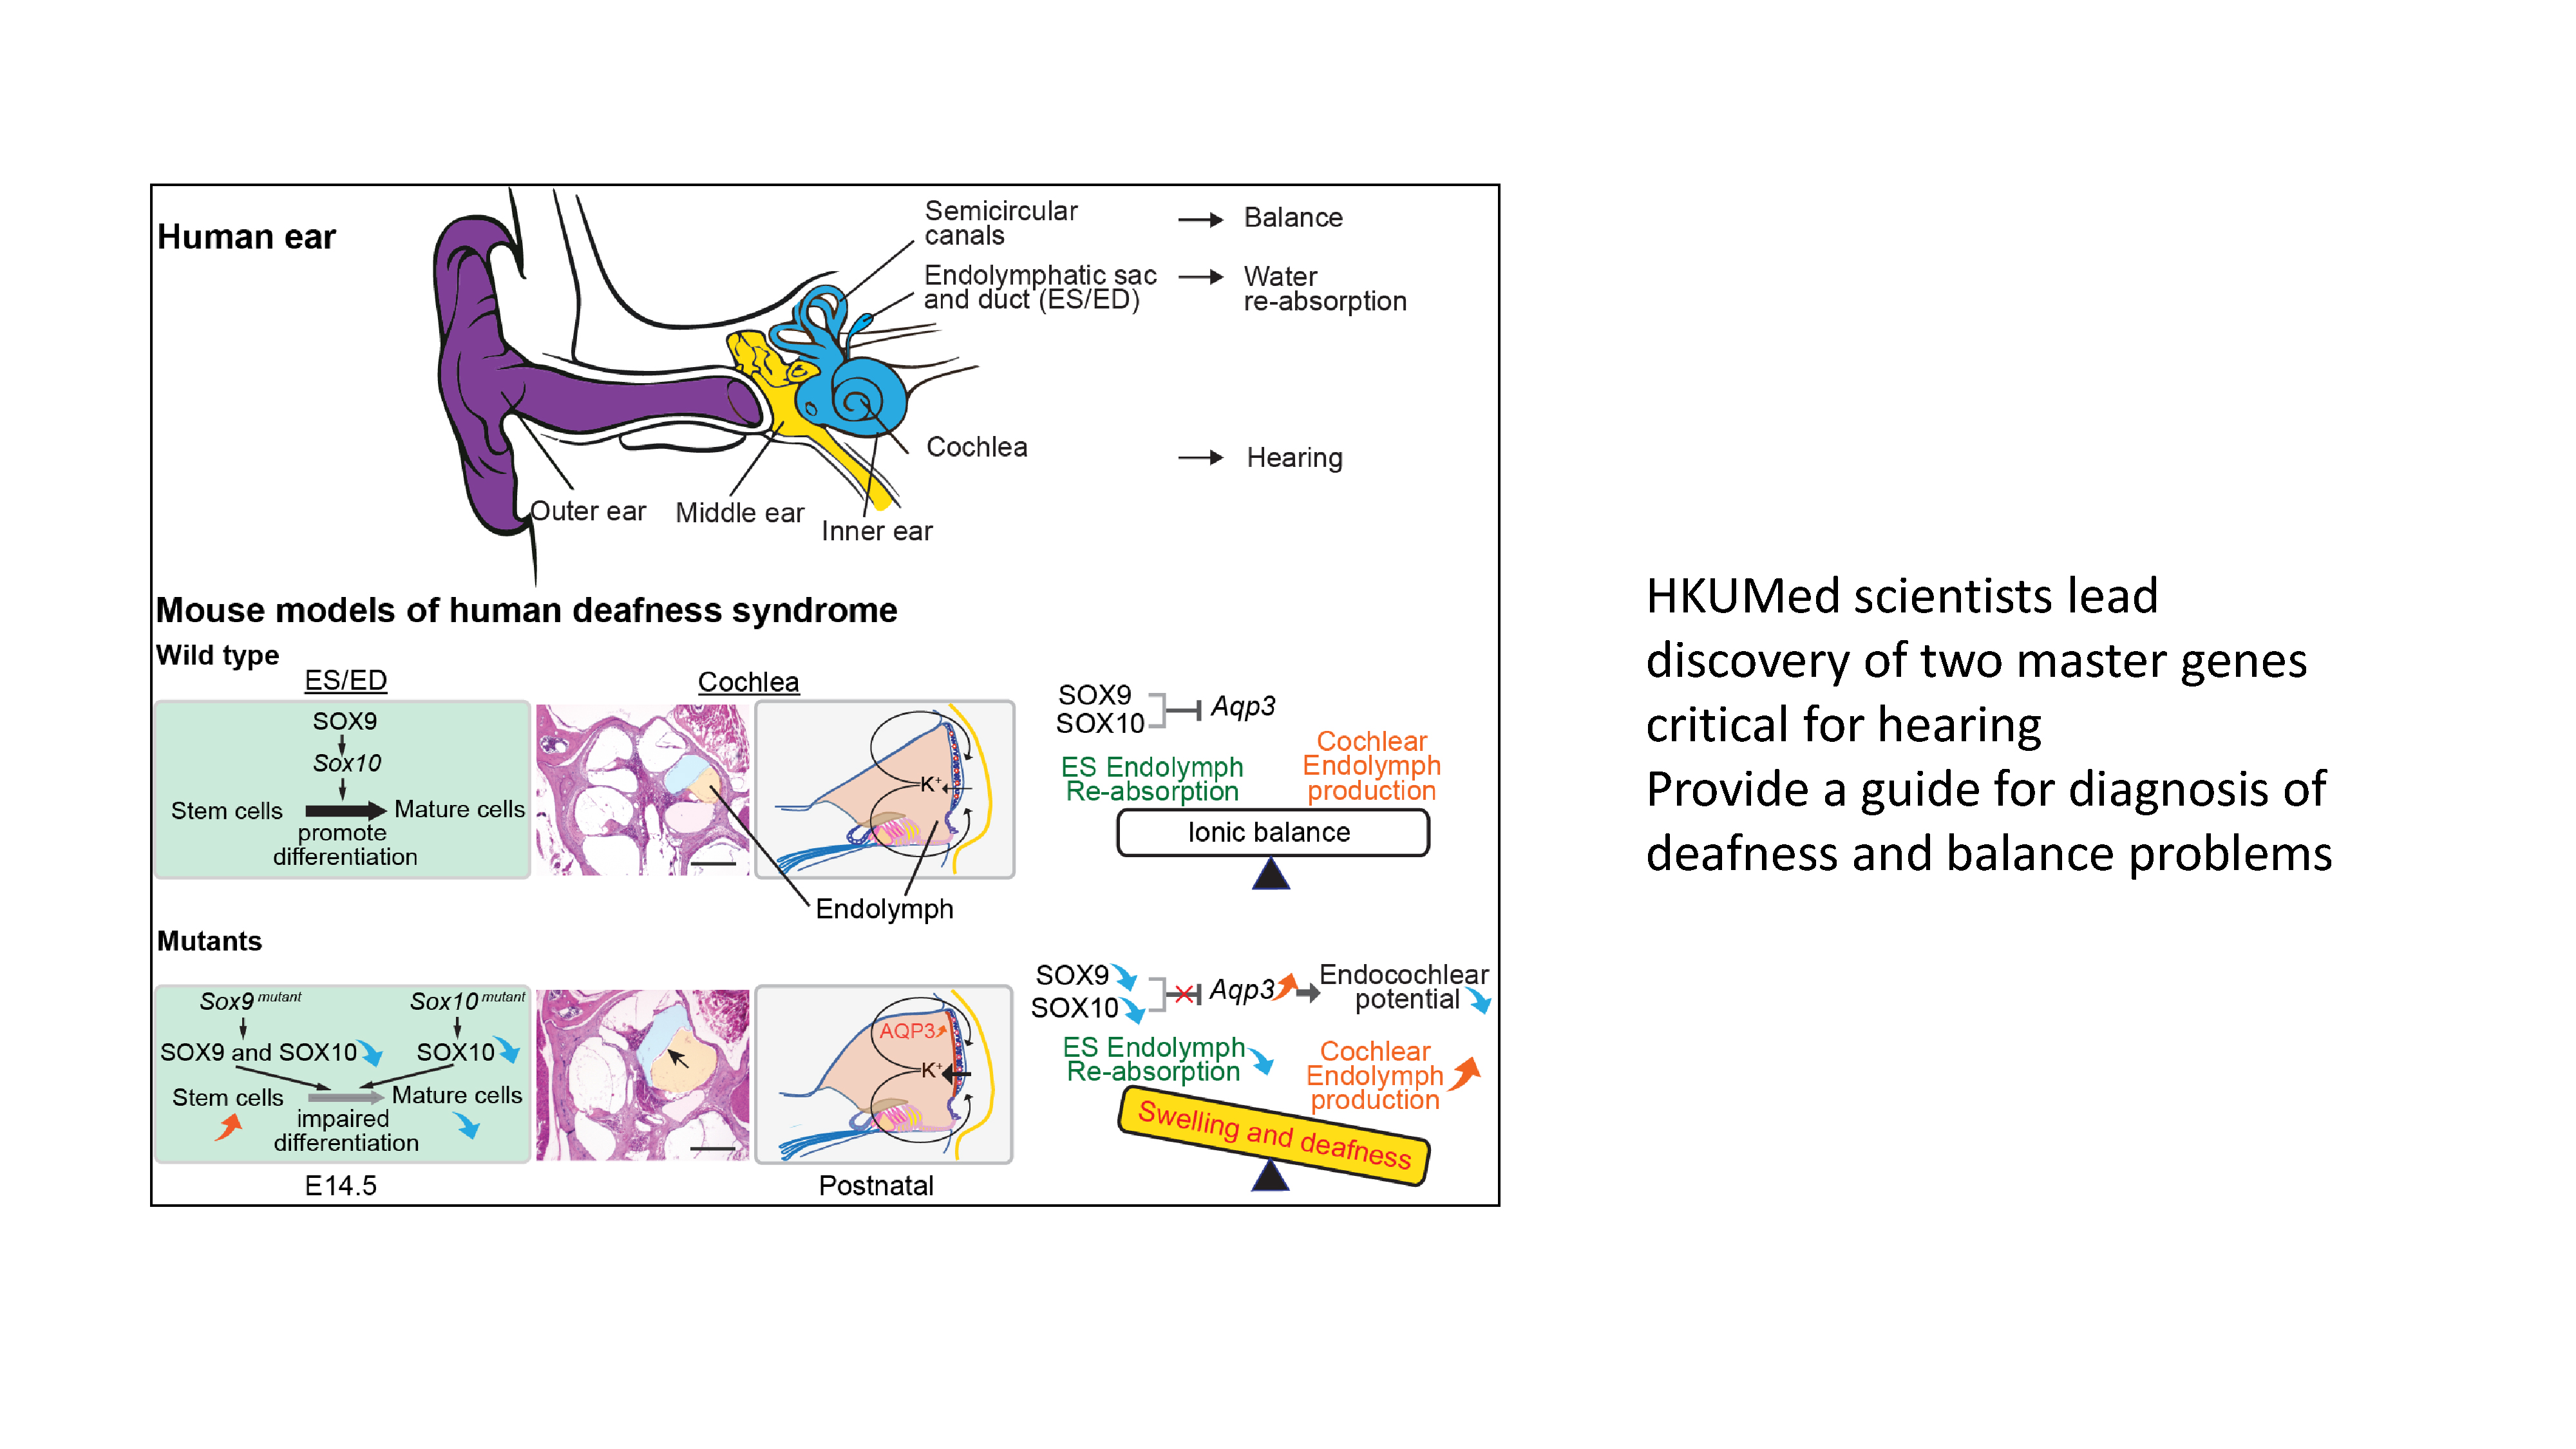 HKUMed scientists lead discovery of two master genes critical for hearing, providing a guide for diagnosis of deafness and balance problems